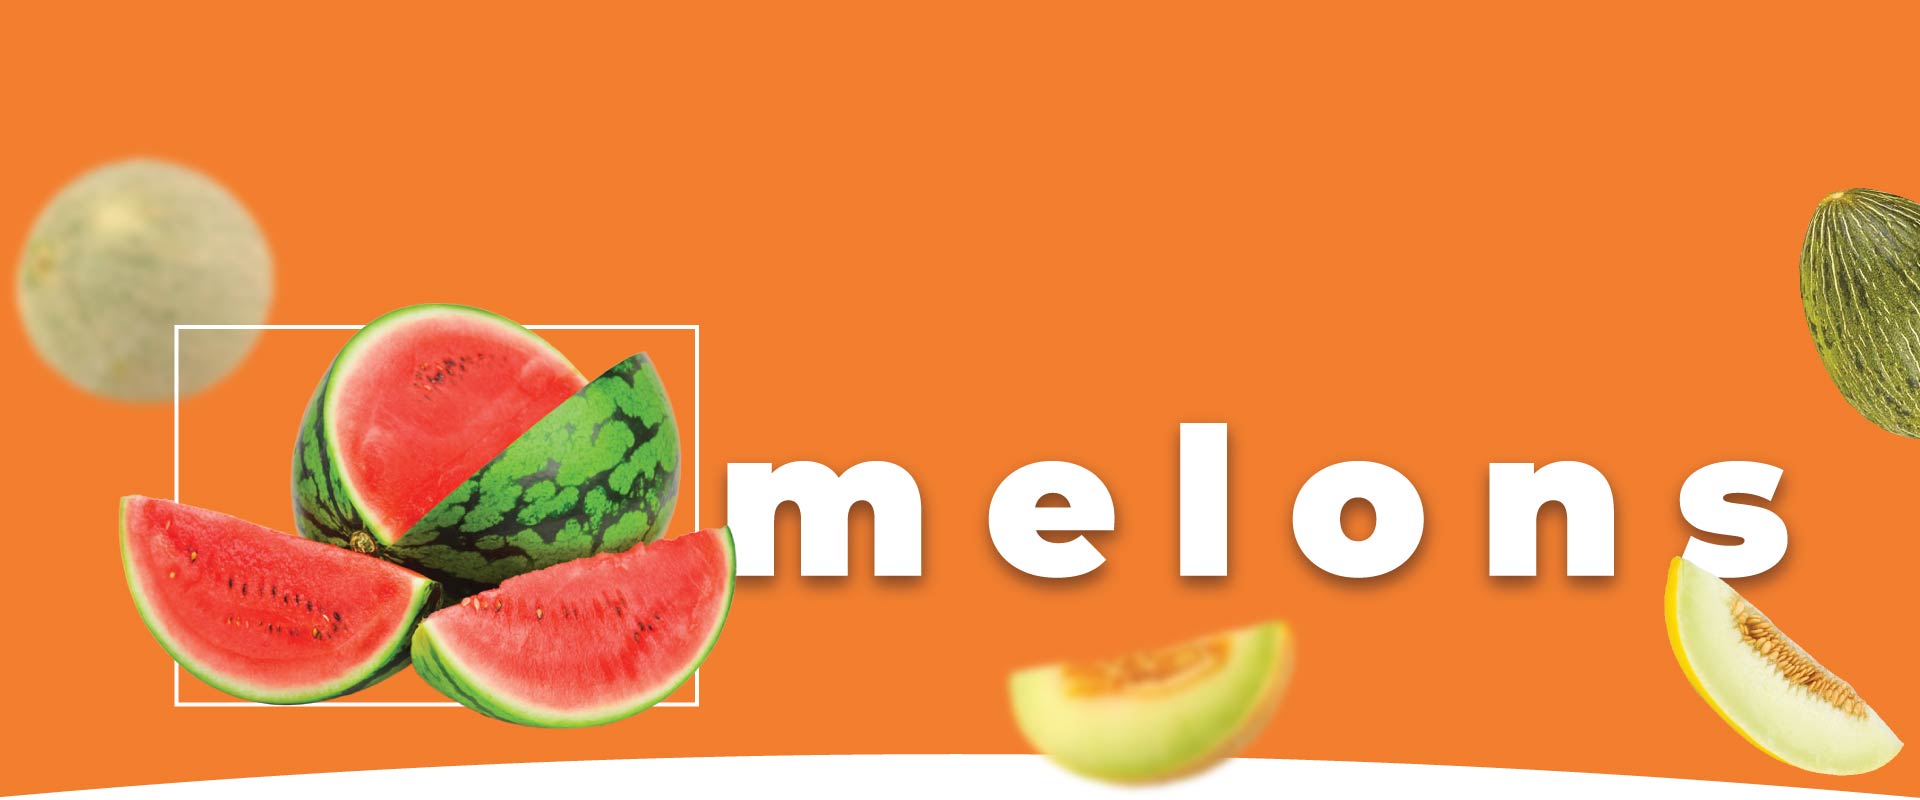 <a href="https://valleypackinginc.com/melons">Melons</a> produce in california united states